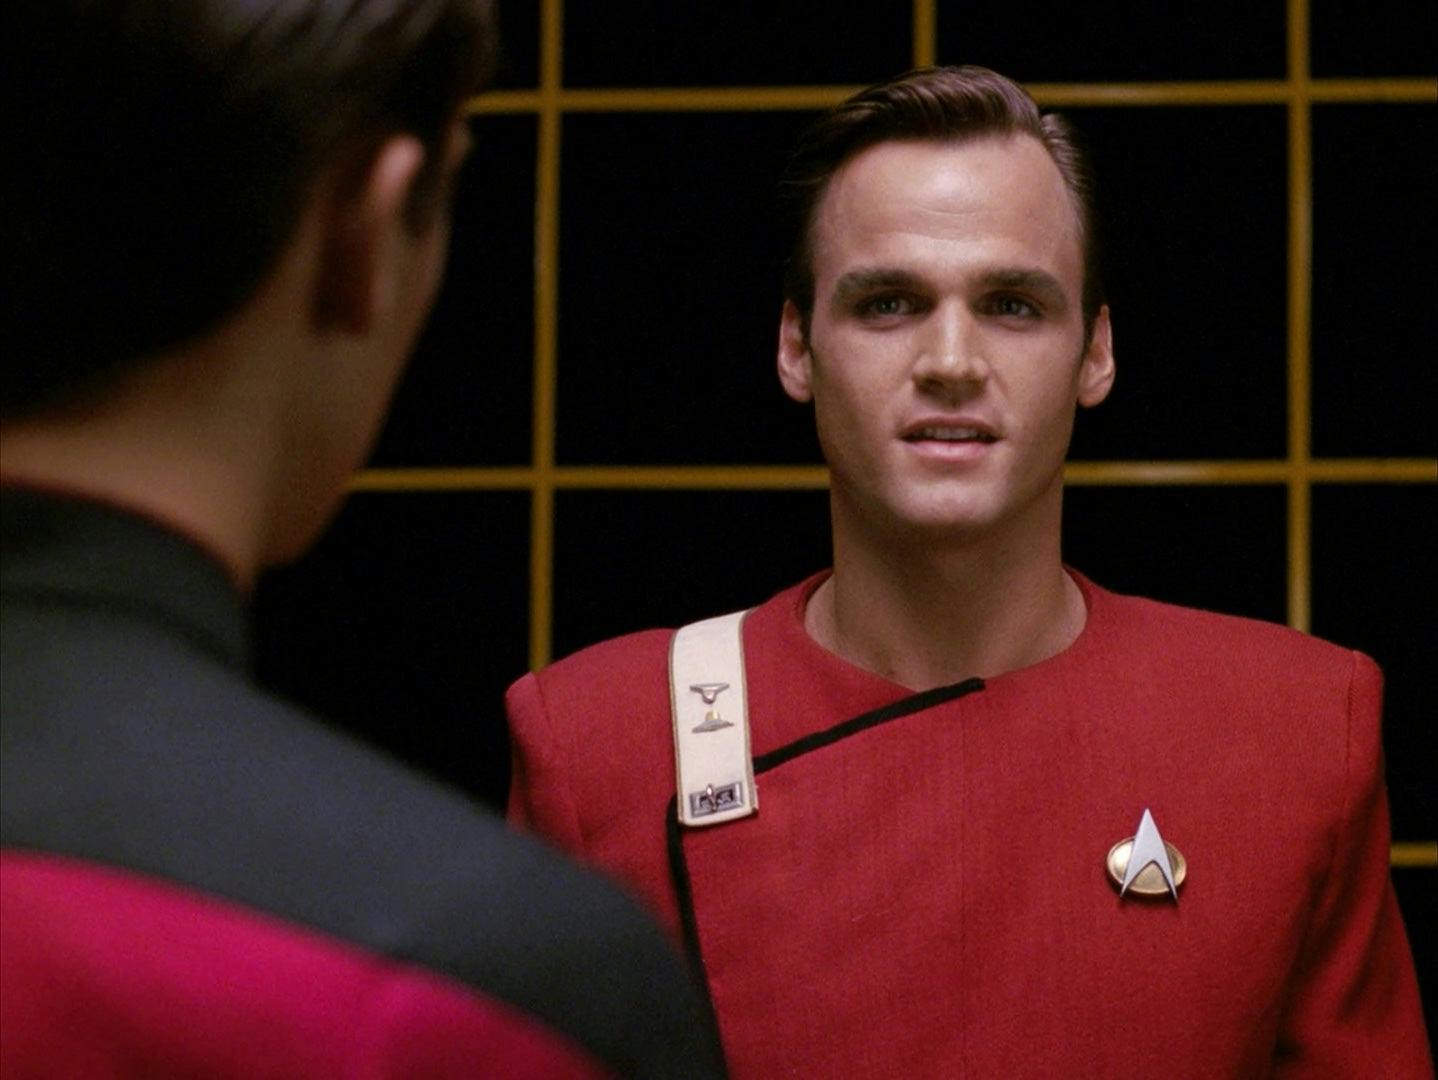 Wesley watches a holographic message from his dad Jack Crusher in the Holodeck on Star Trek: The Next Generation